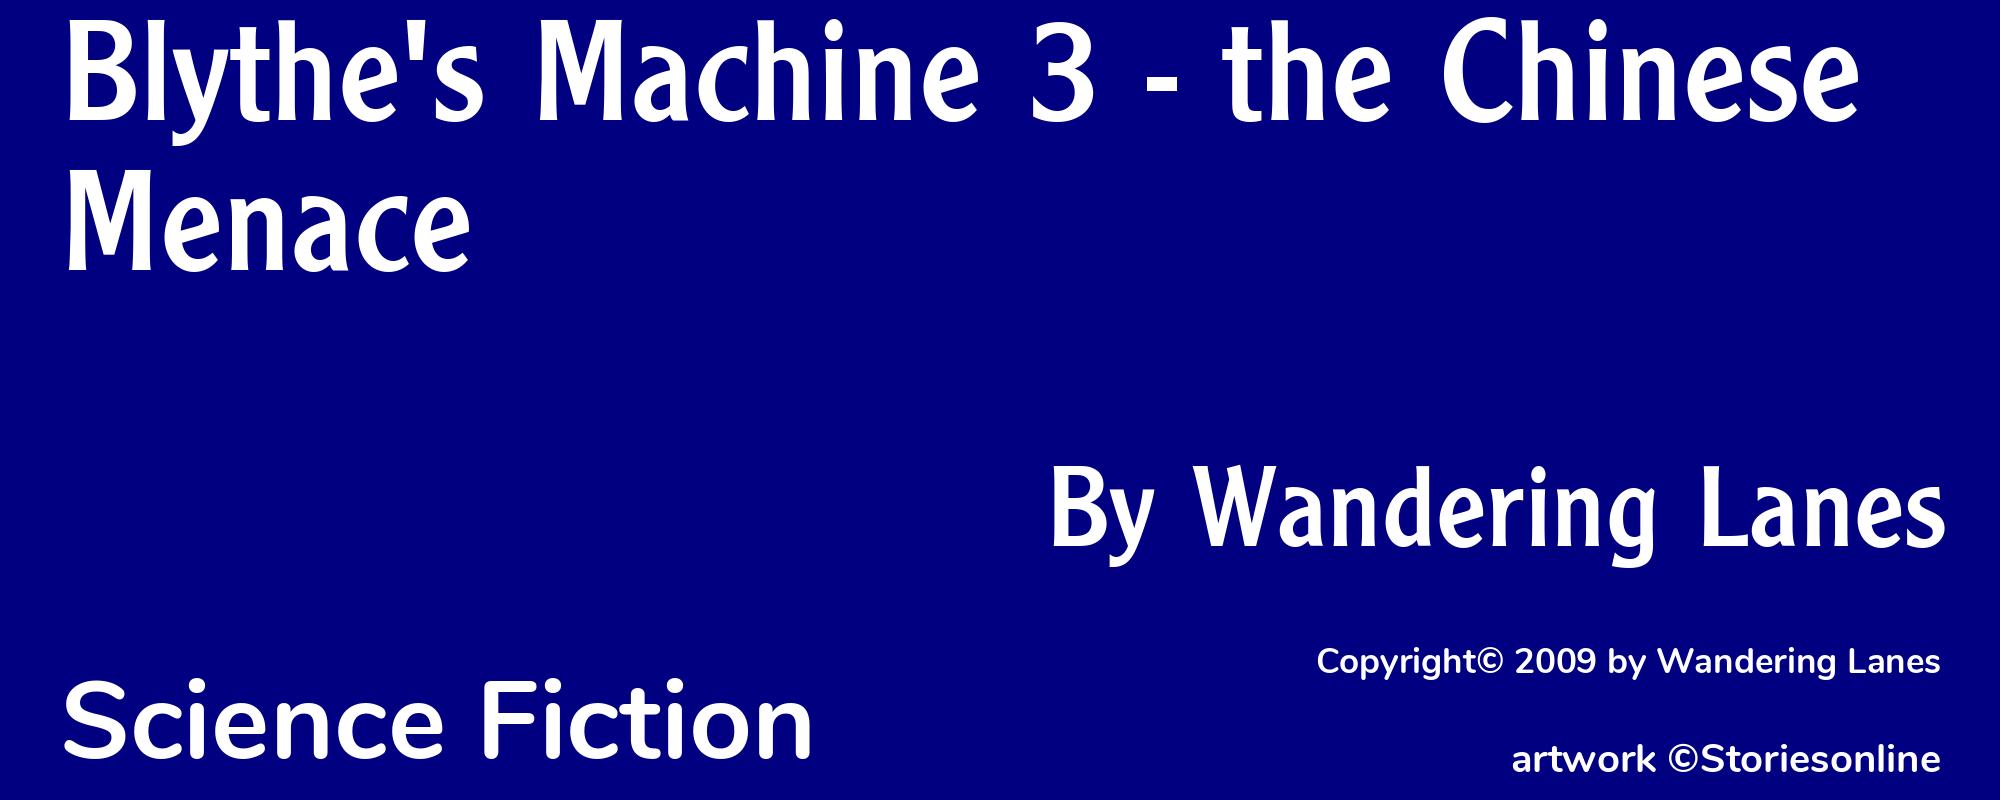 Blythe's Machine 3 - the Chinese Menace - Cover